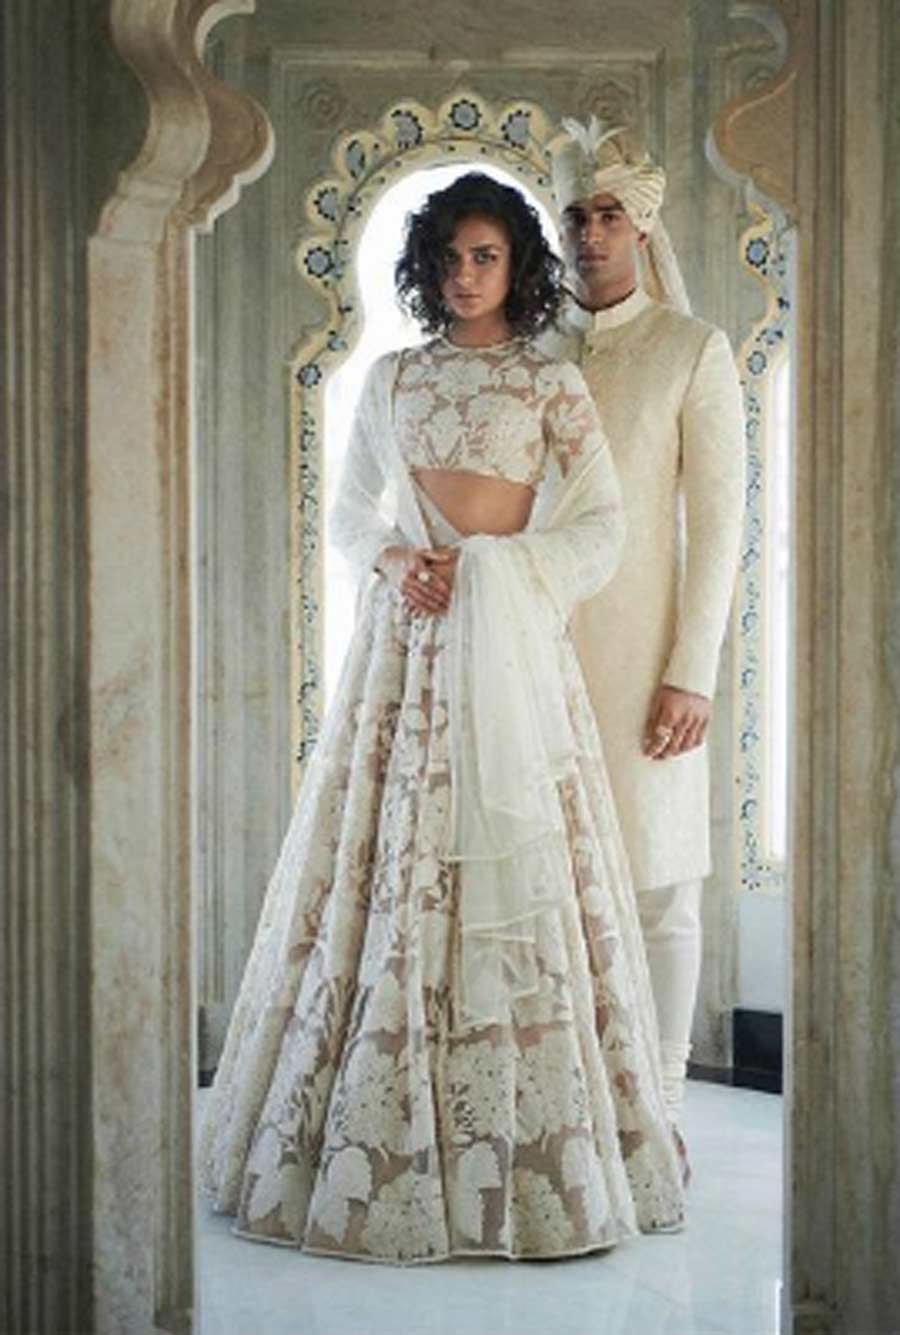 A new-wave Lehenga: Sabyasachi’s new White Wedding meshes desi styling with western influences with hand-dyed tulle saris and lehengas and embroidered veils. Explore new-age silhouettes in silk or jamdani weaves and festive accents 